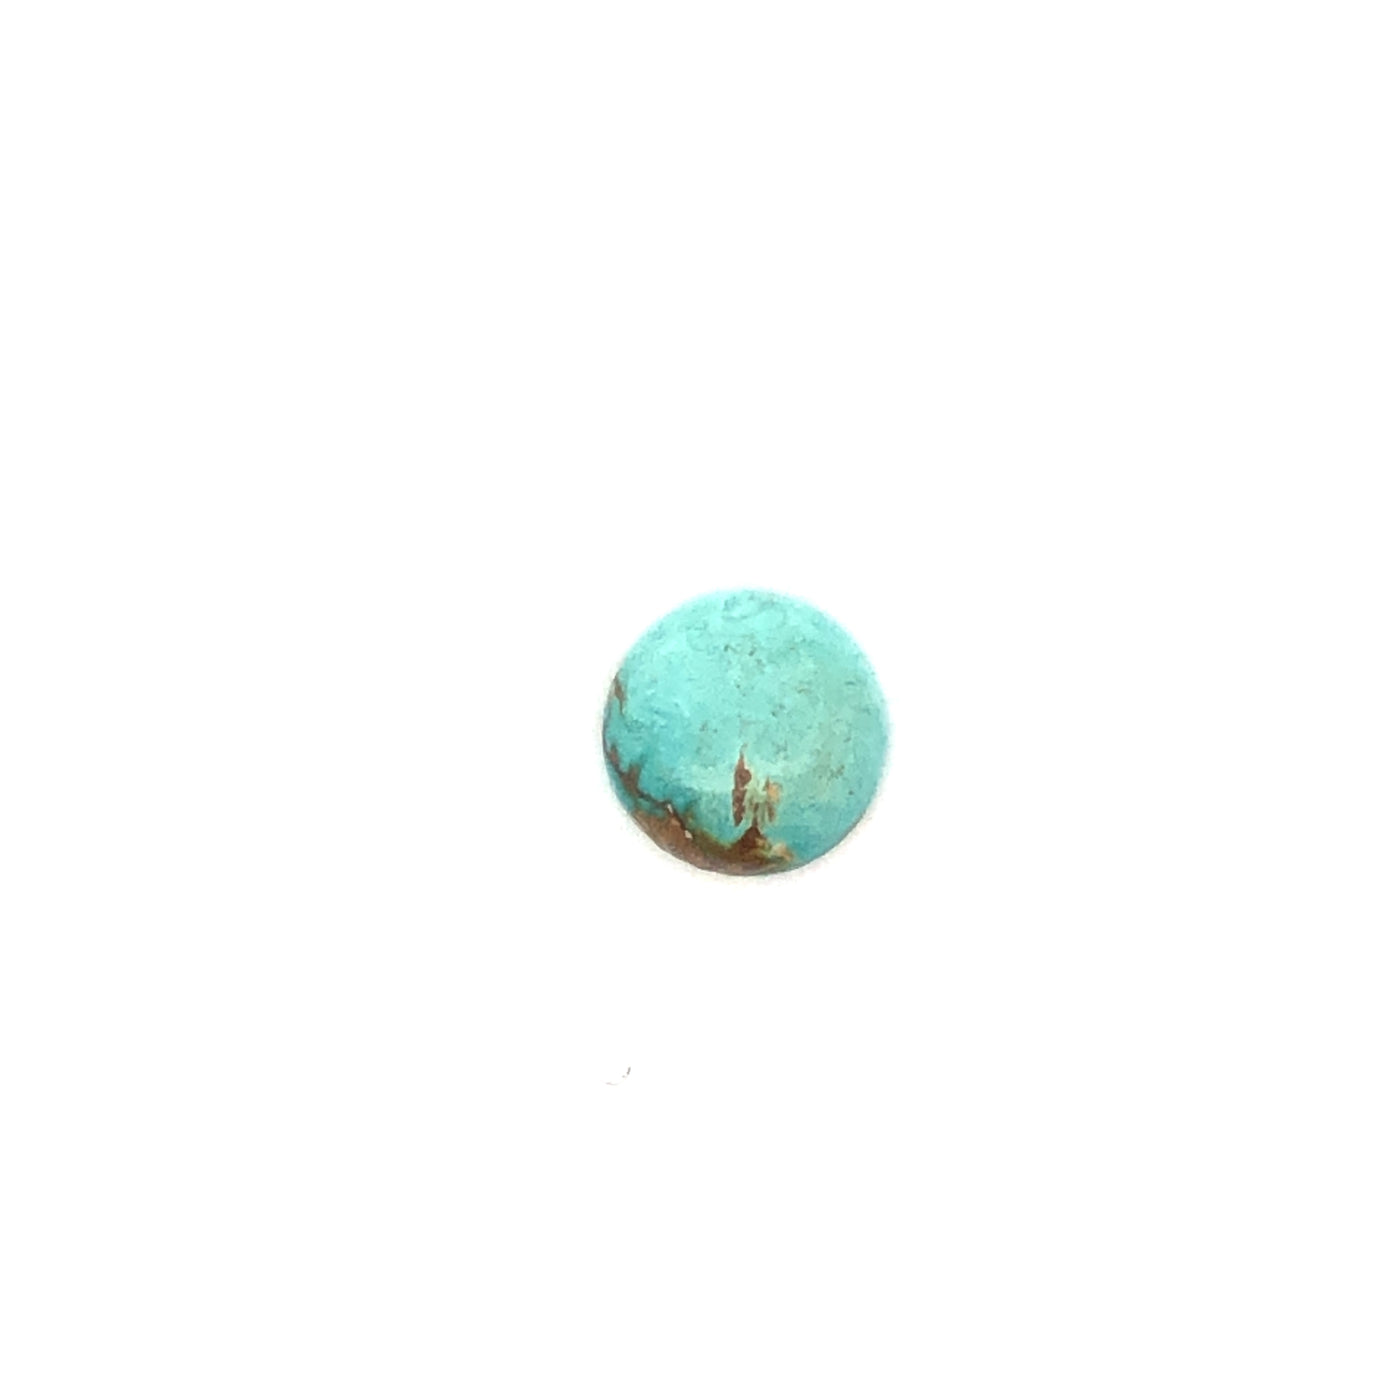 Loose Narooma Turquoise Round Shaped 5.88Ct Blue With Some Brown